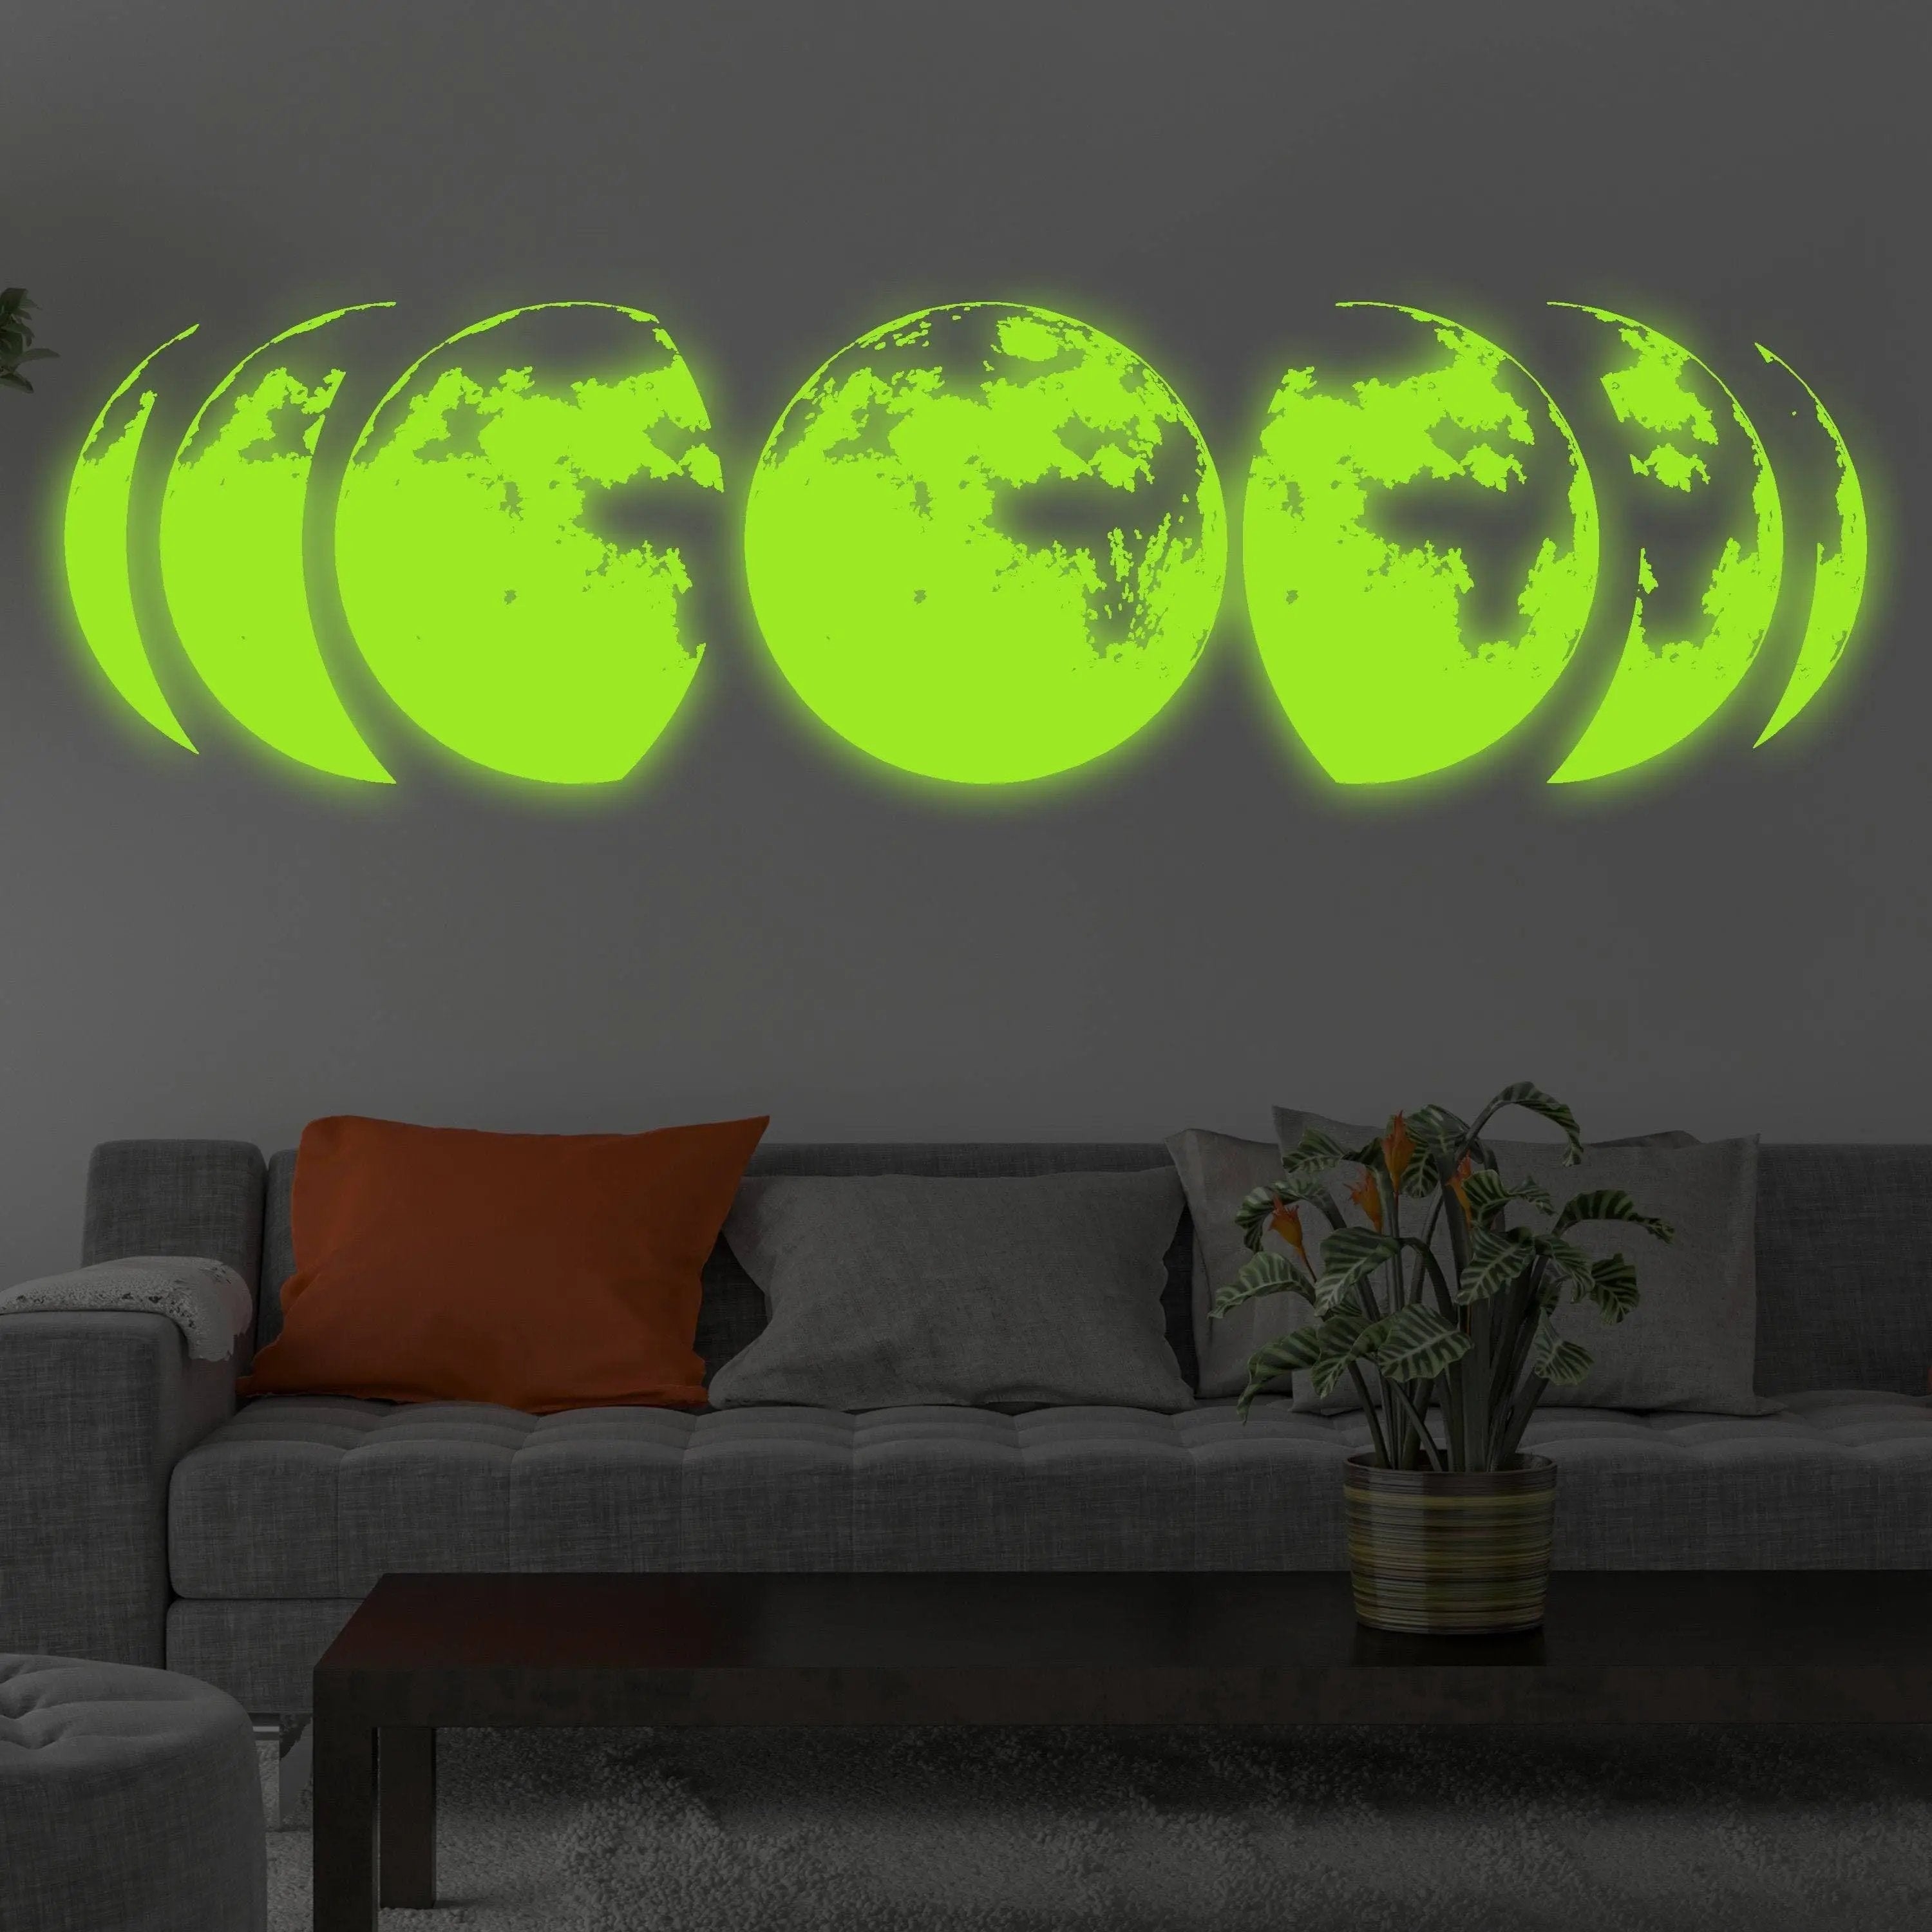 Glow-in-the-Dark Art  Neon crafts, Art for kids, Cool art projects